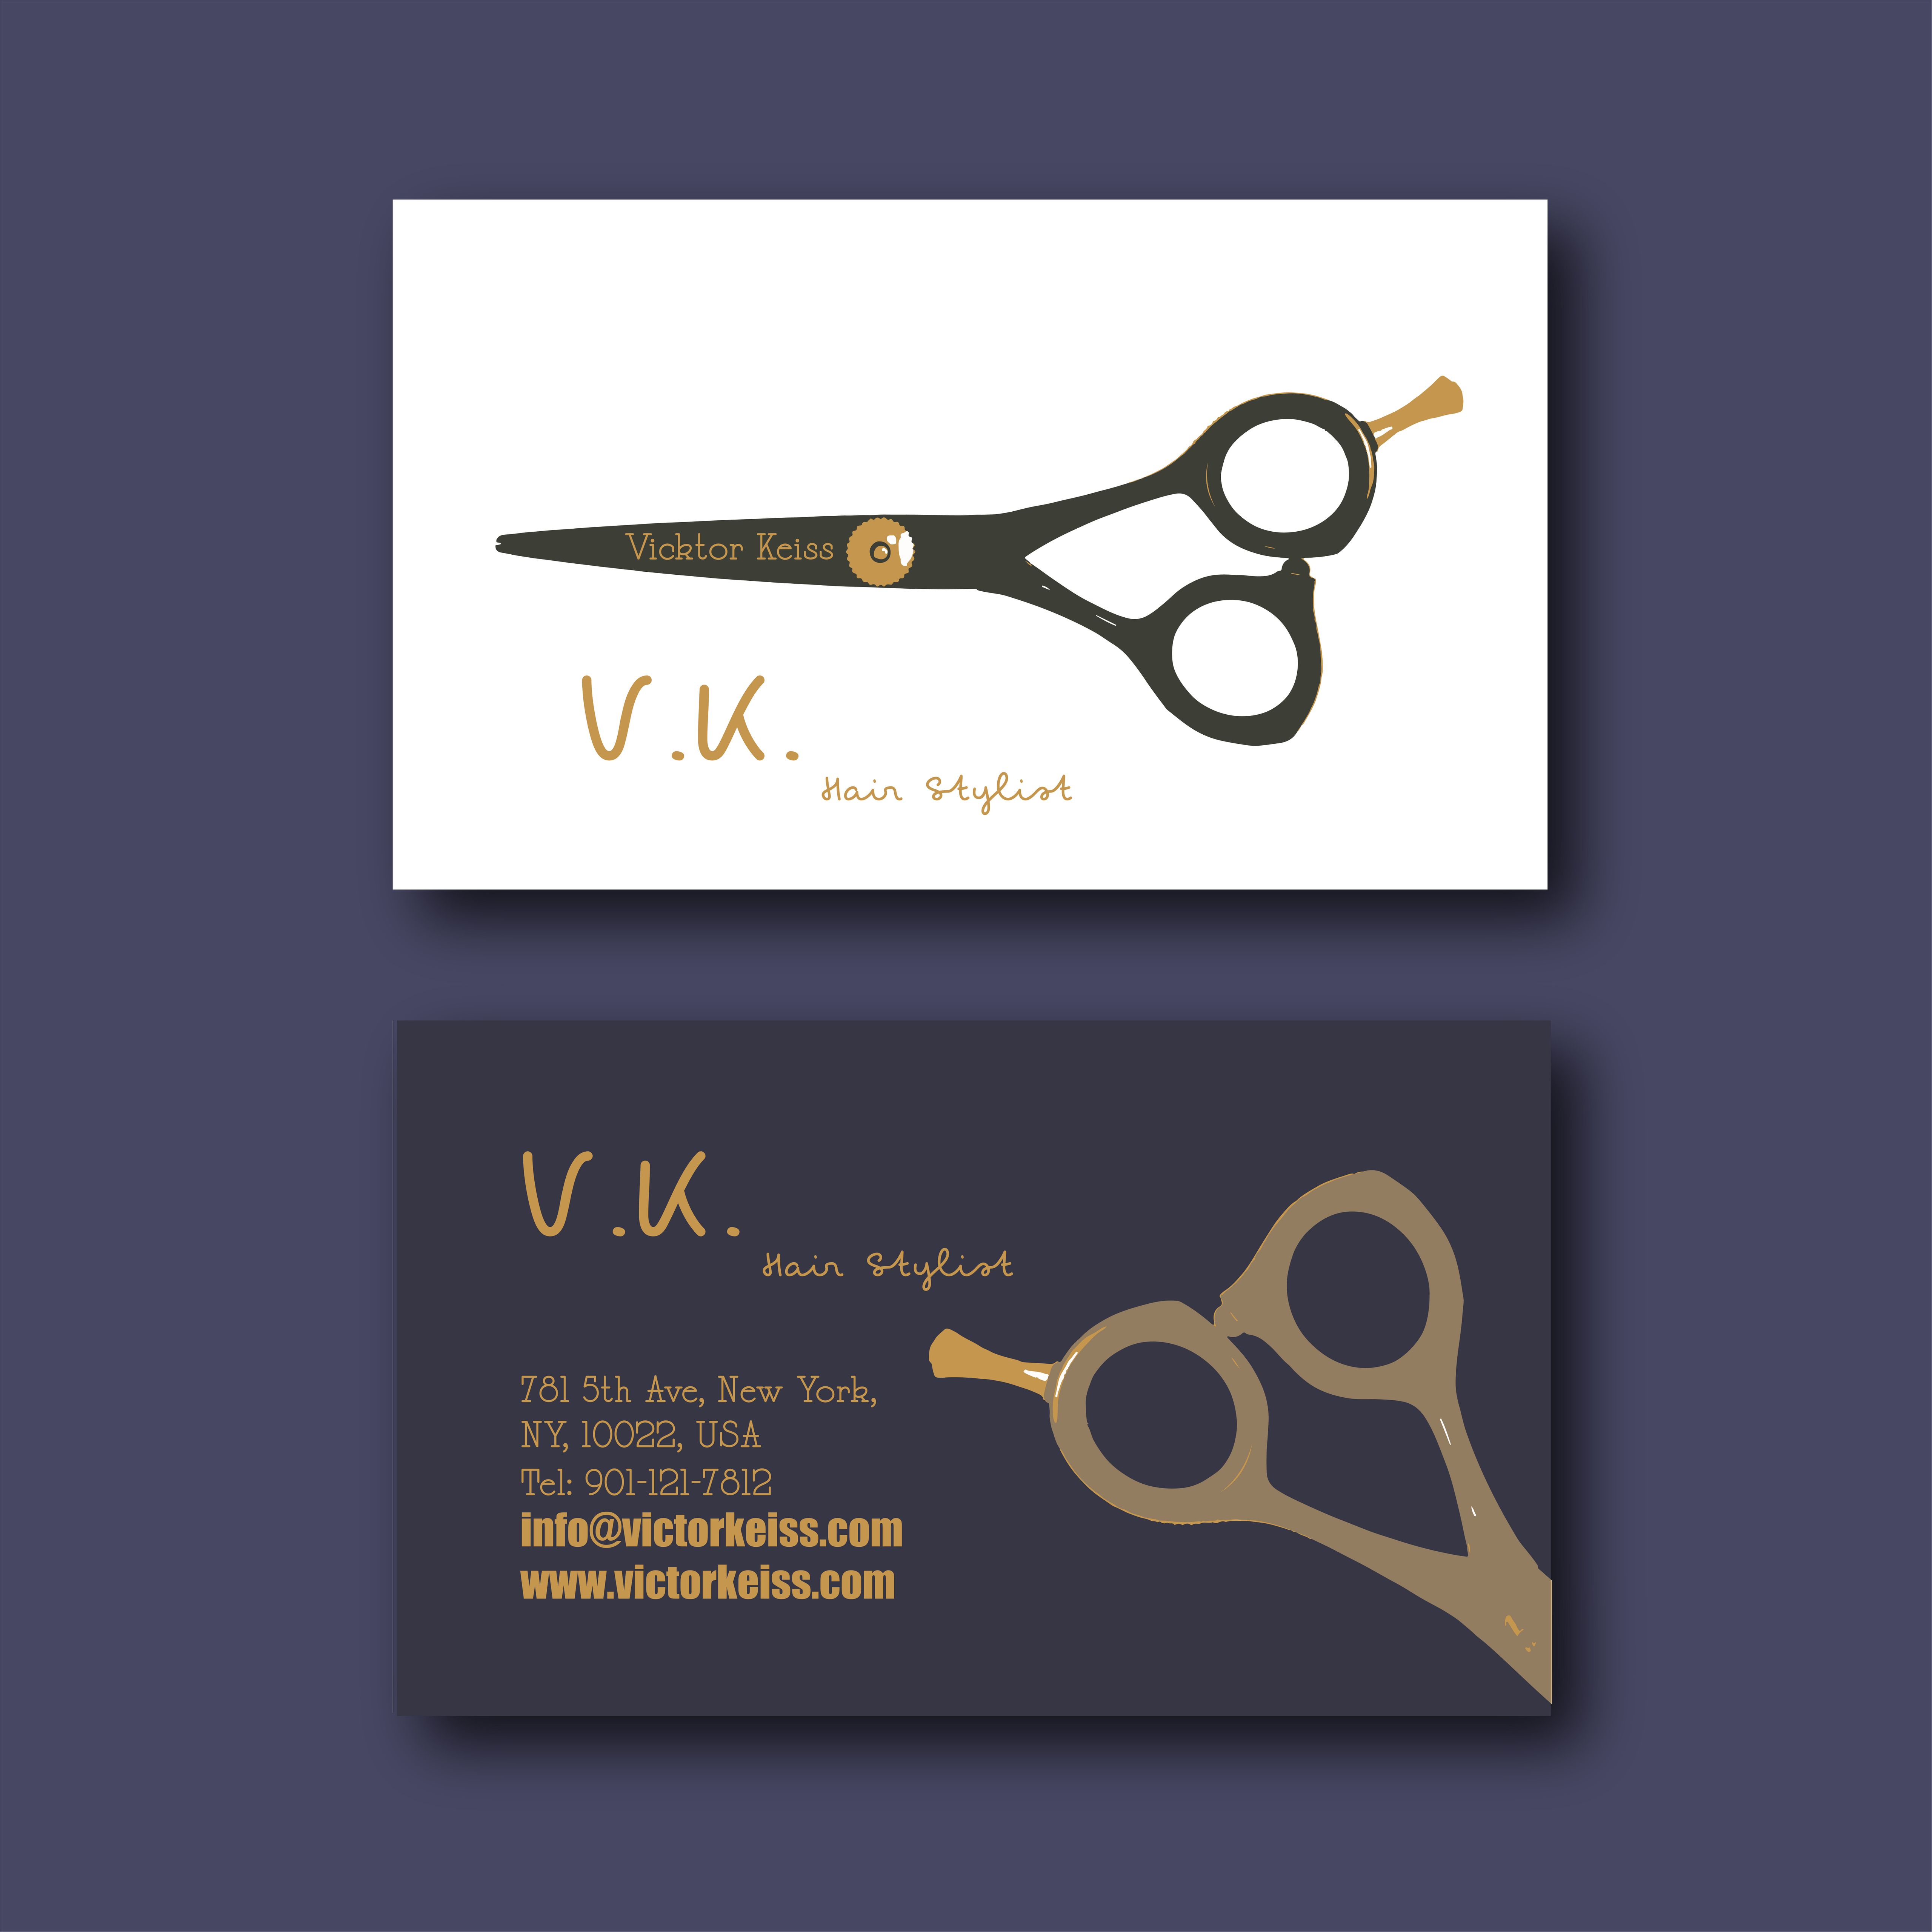 Business Card for Victor Keiss - Hair Stylist Professional